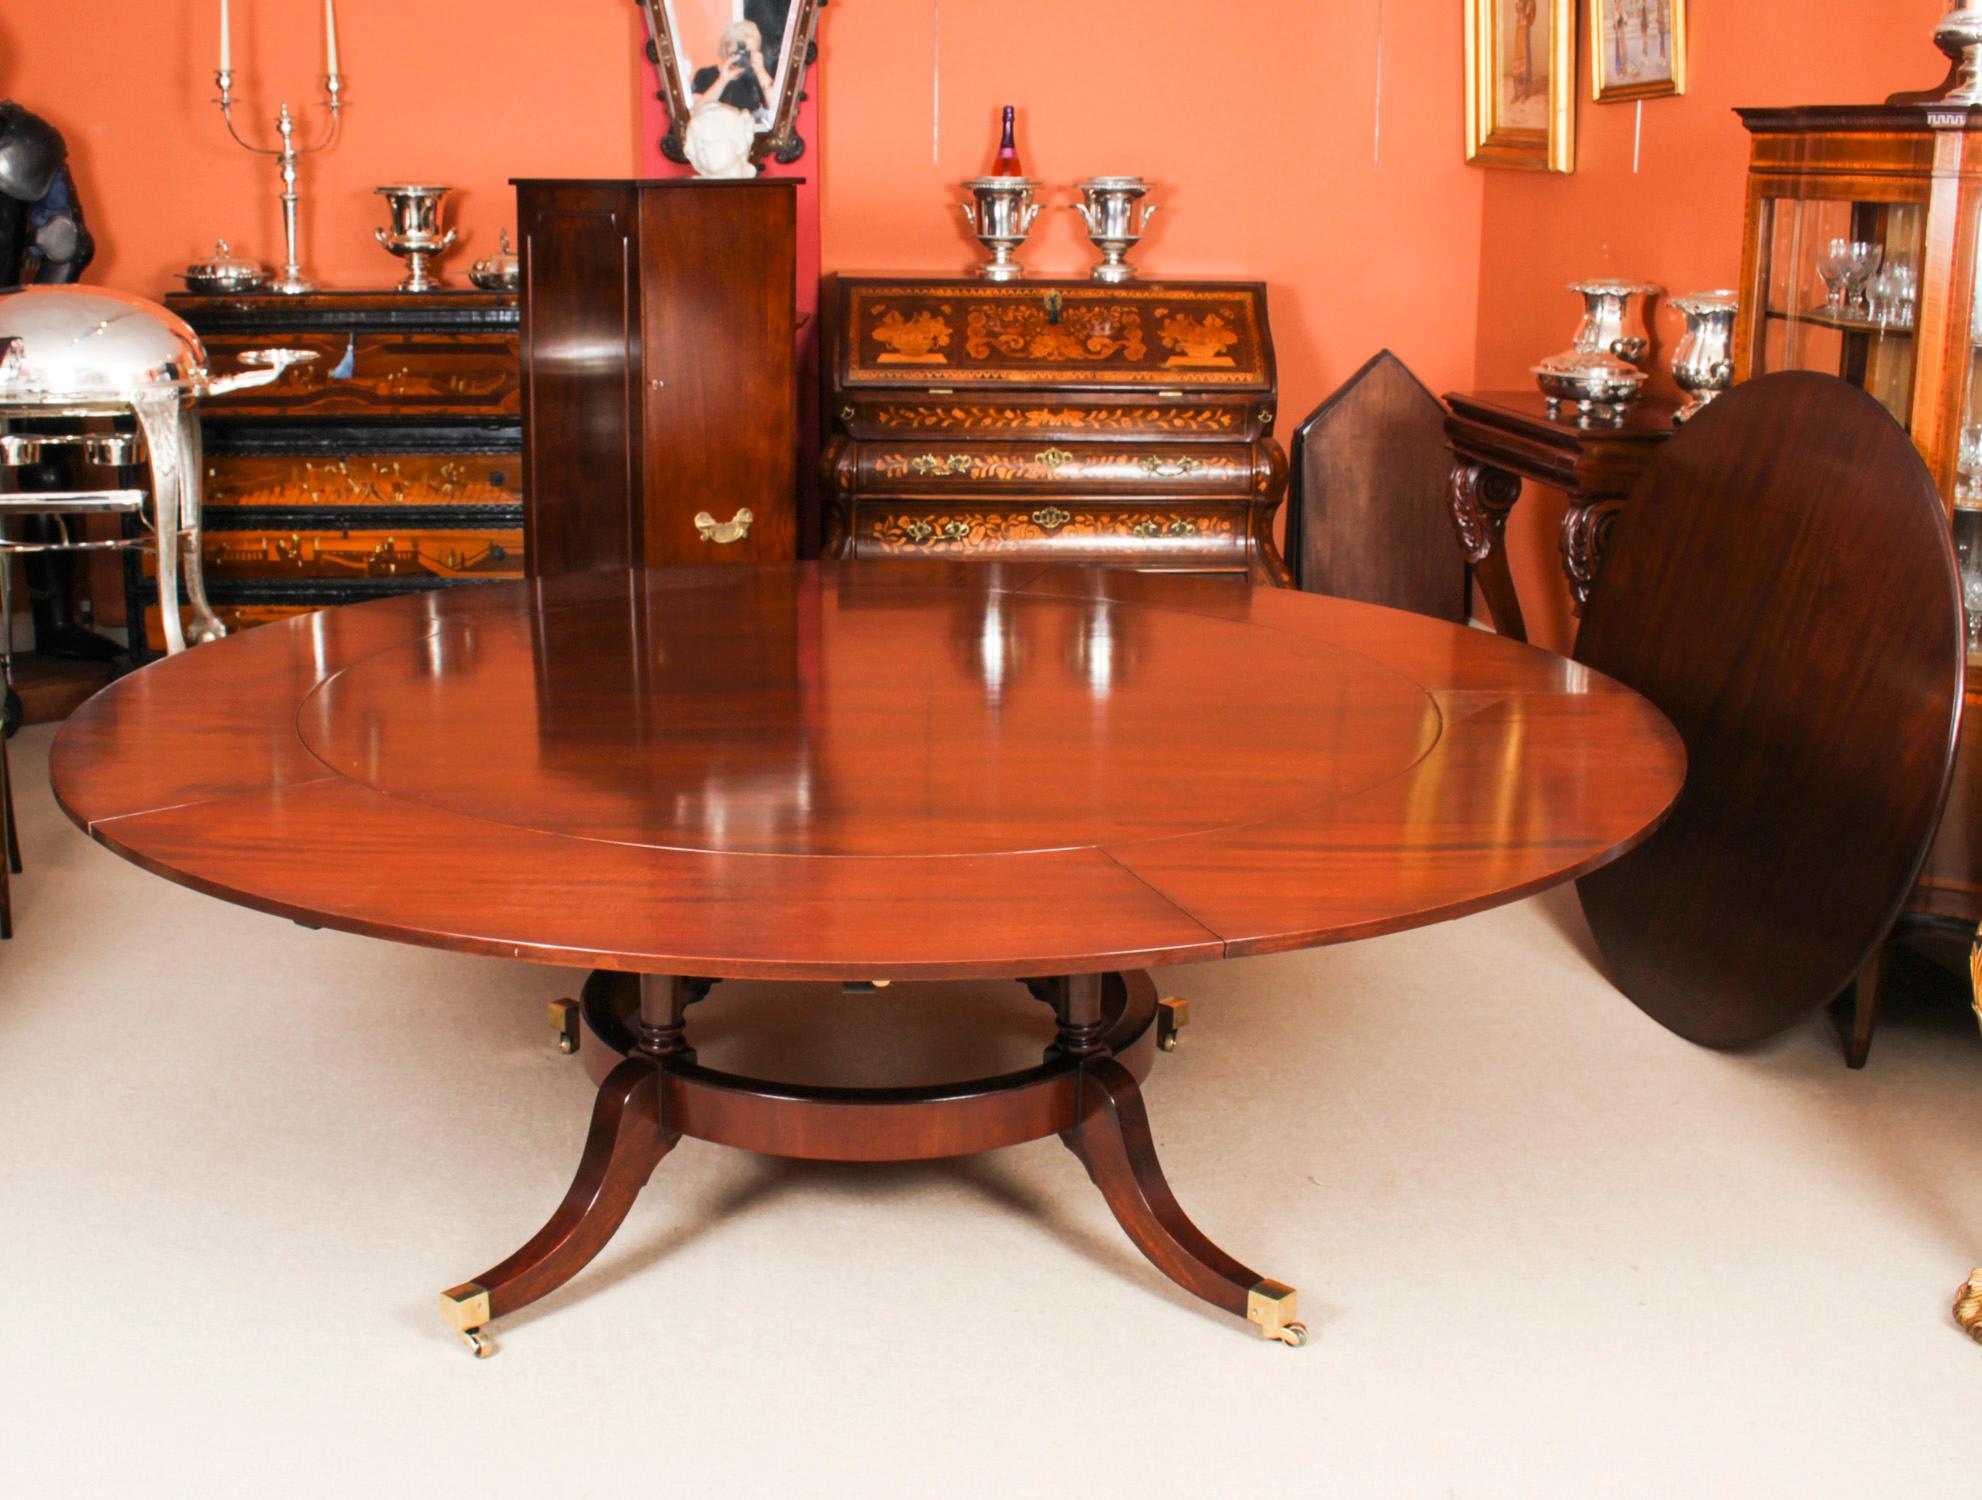 Mahogany Vintage Jupe Dining Table, Leaf Cabinet, Lazy Susan & 10 Chairs 20th C